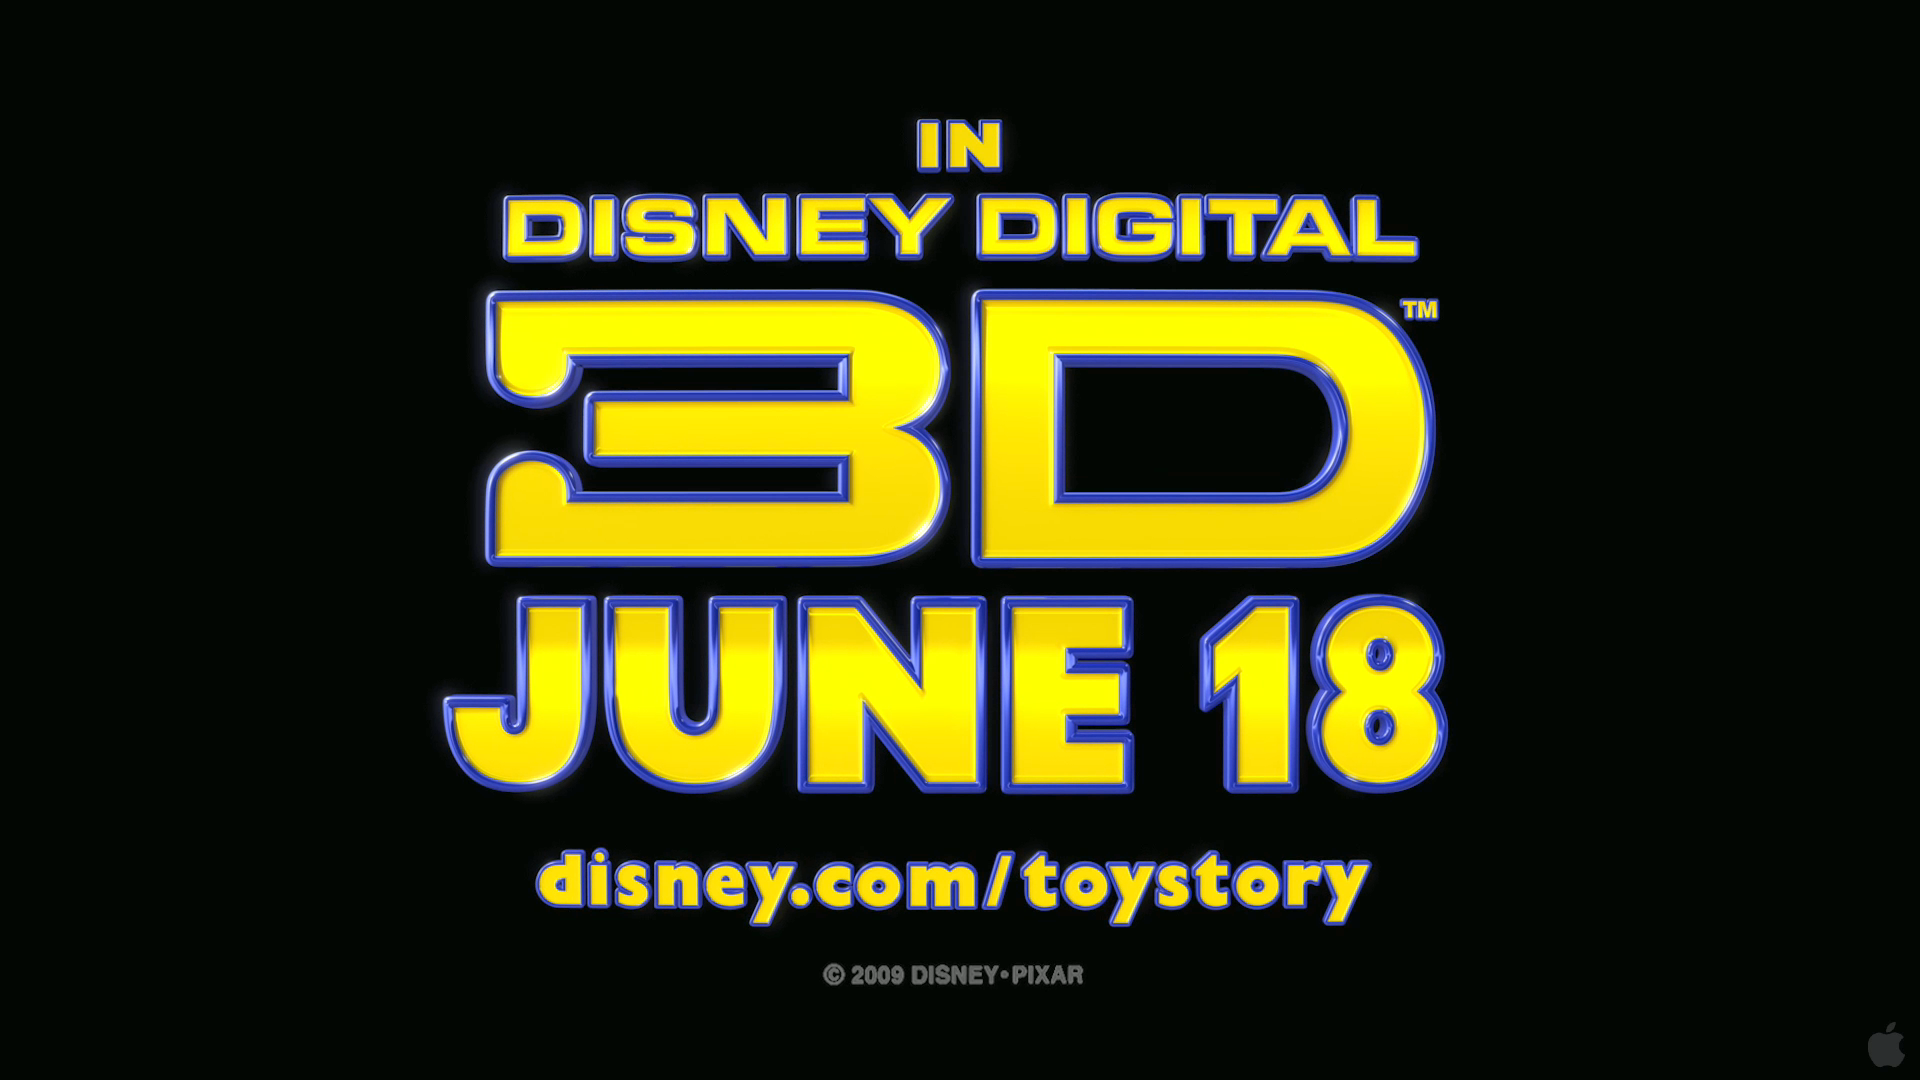 How do you use a Toy Story font?